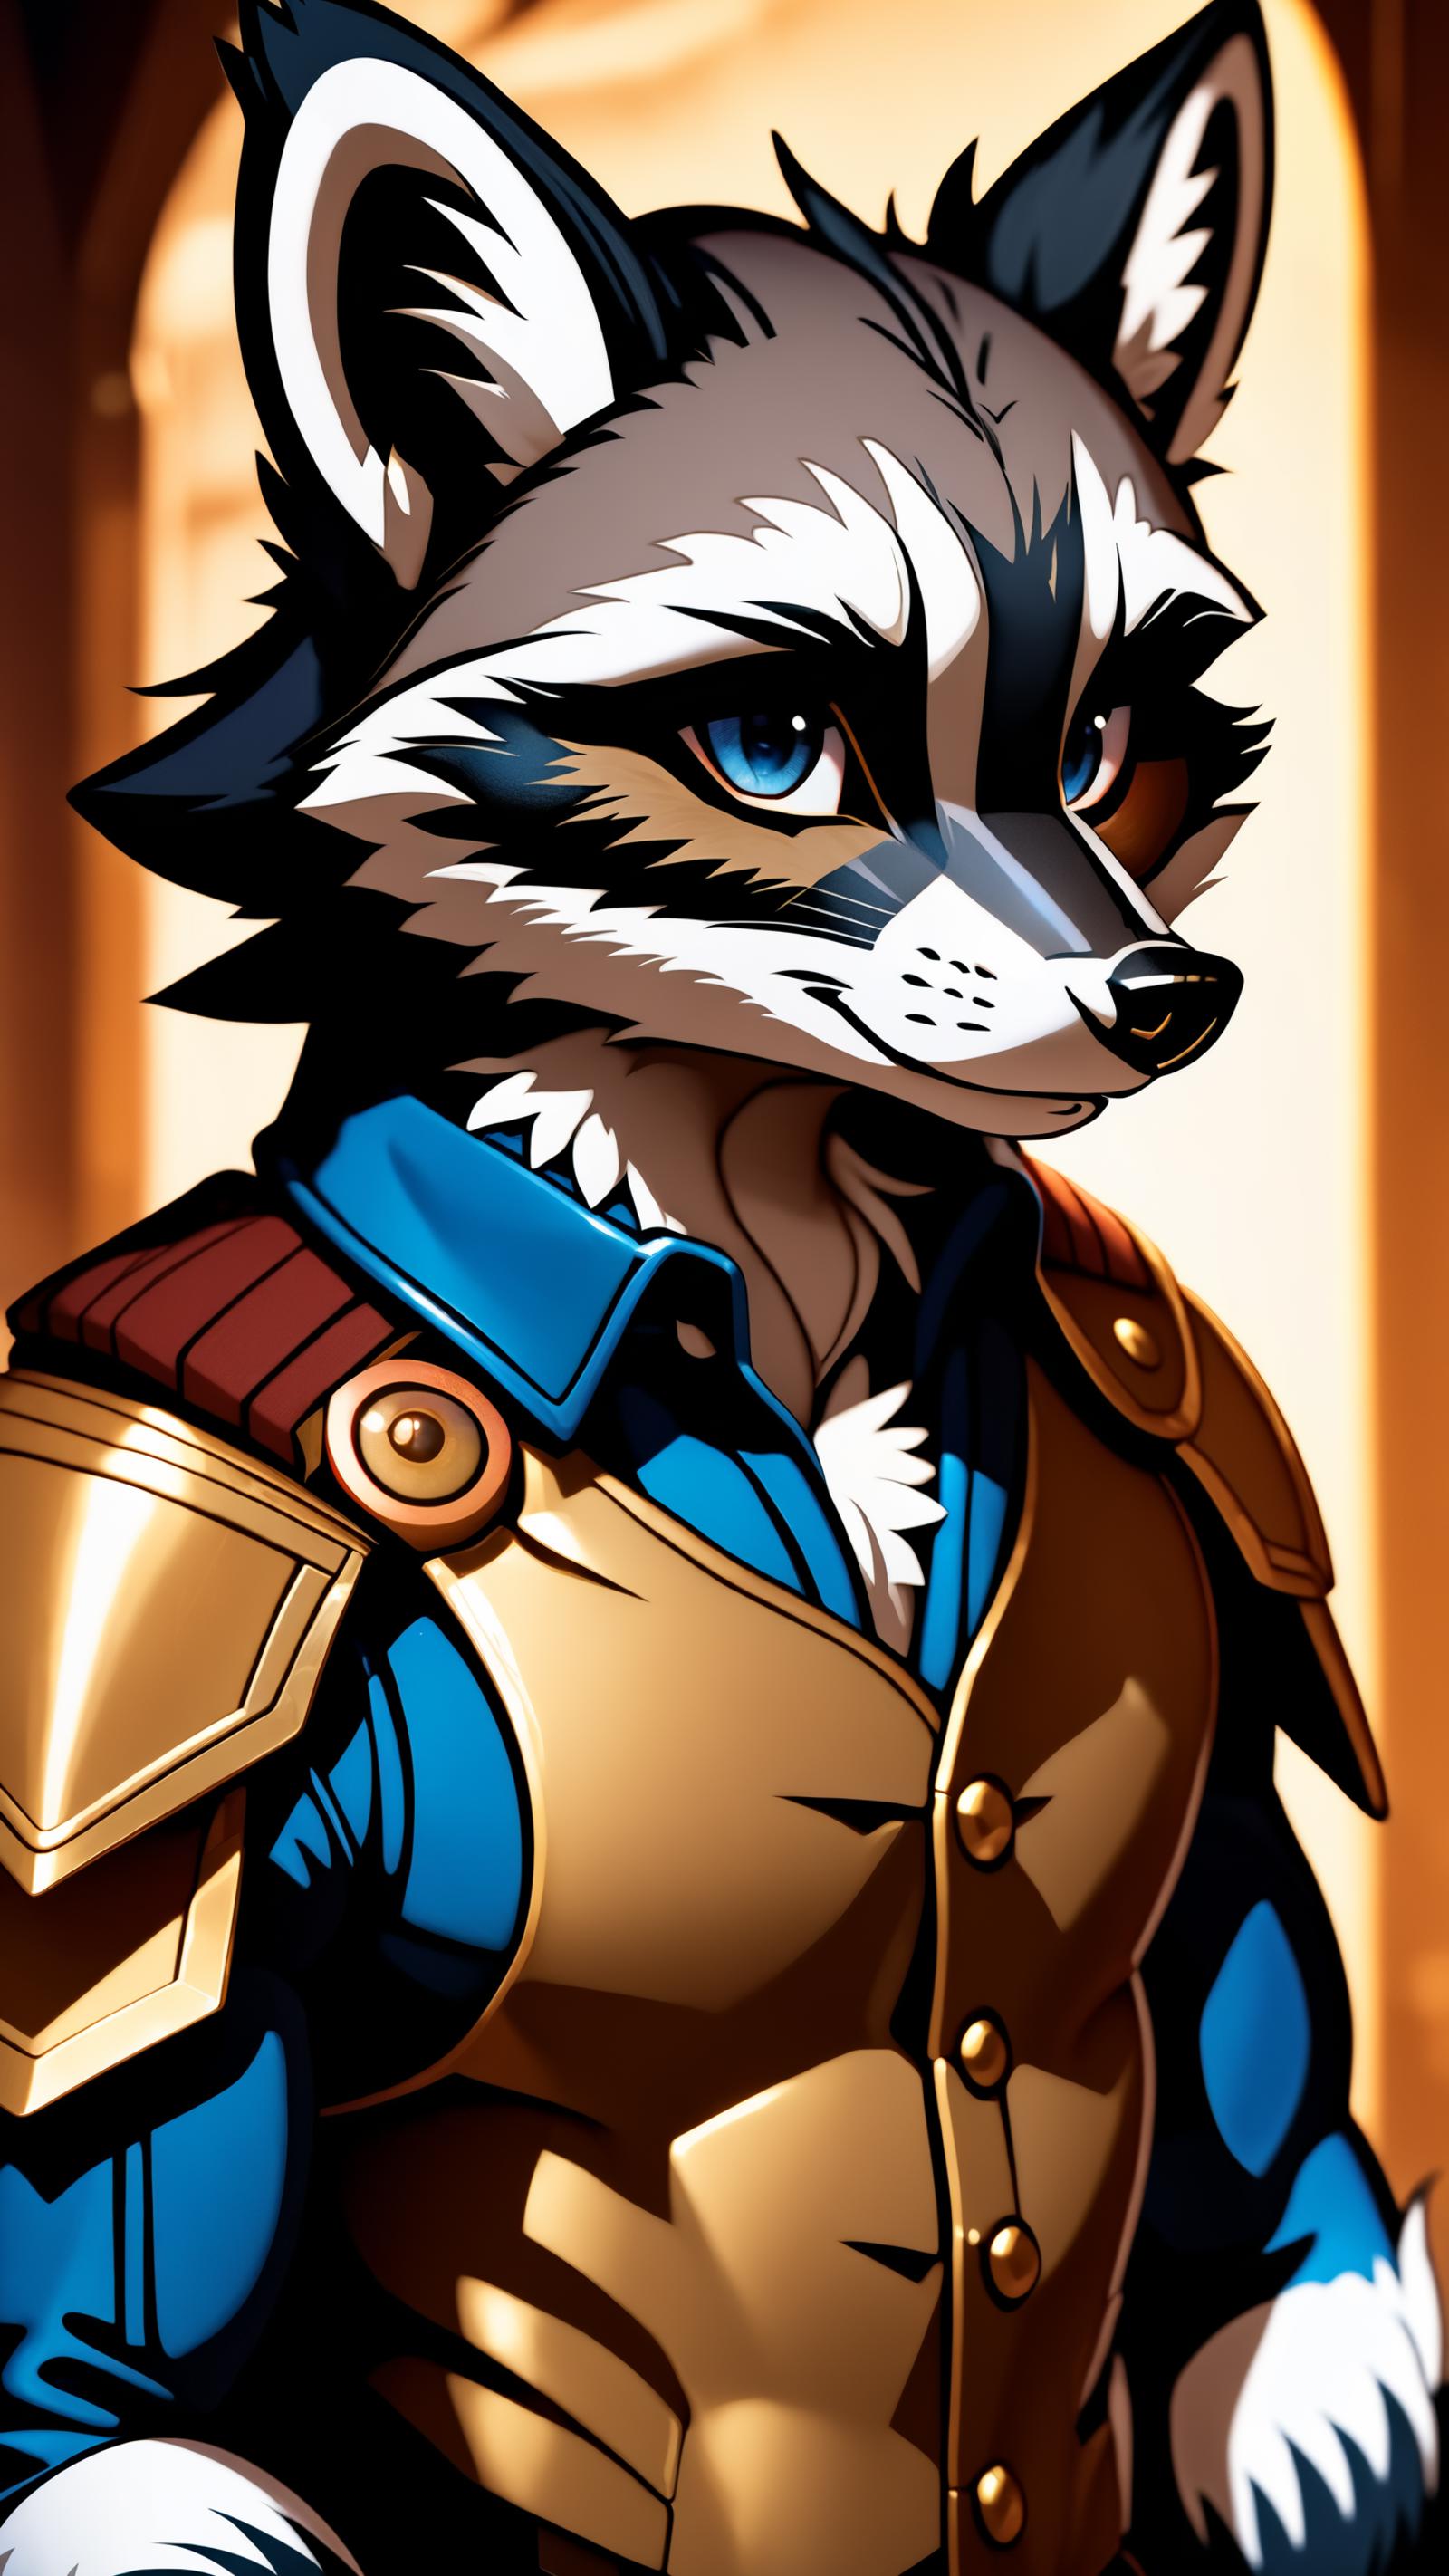 A cartoon raccoon in a blue shirt and vest.